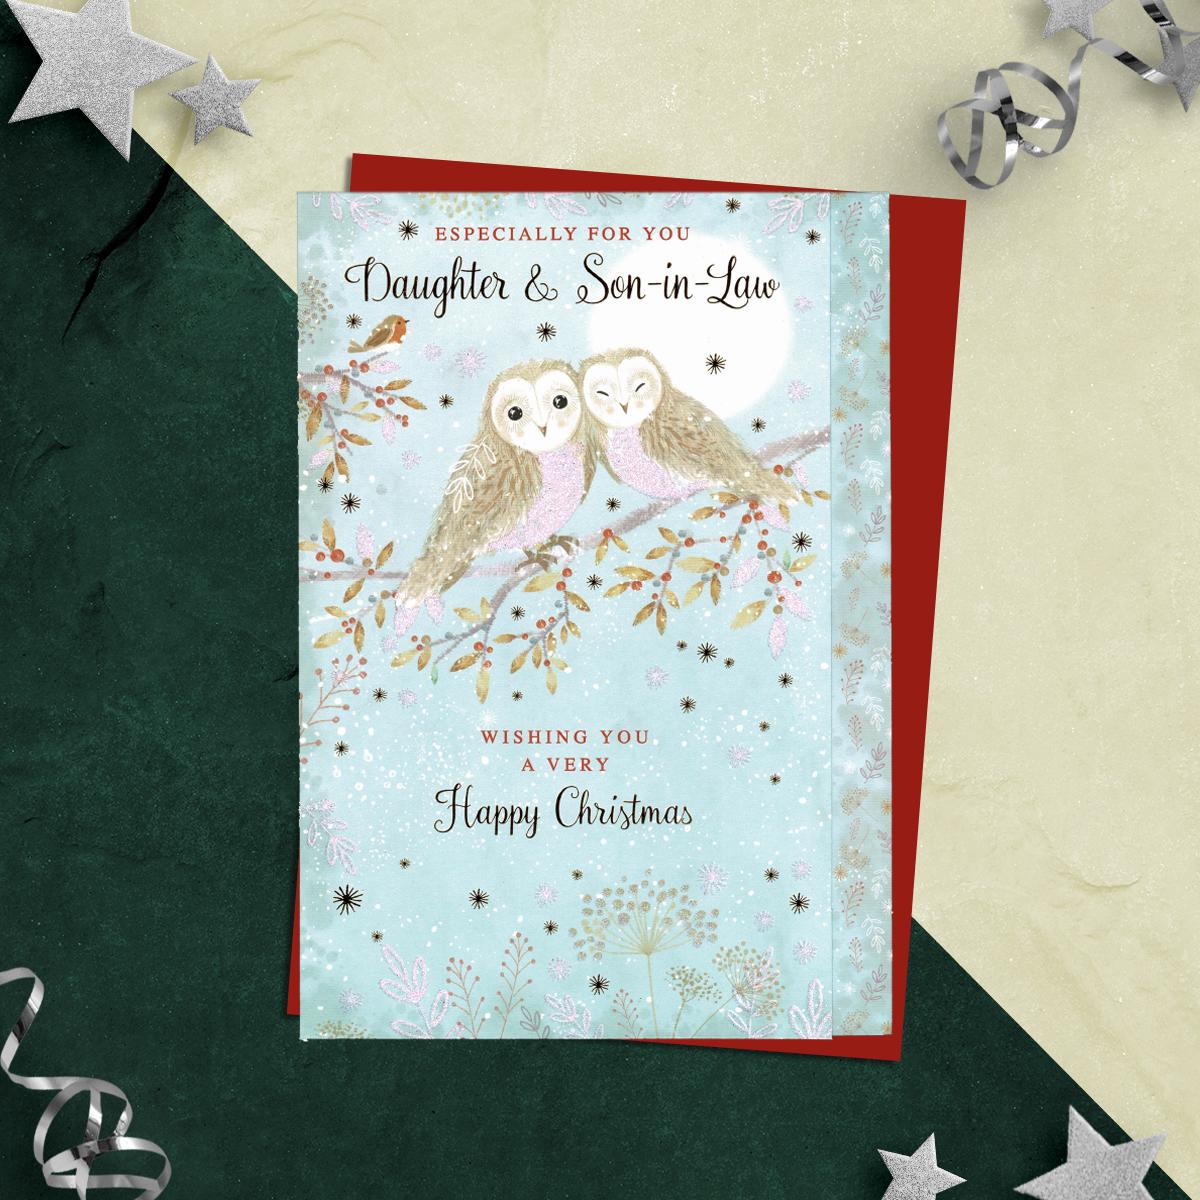 Especially For You Daughter And Son In Law Wishing You A Very Happy Christmas Featuring Two Owls On A Branch. Finished With Gold Foiling, Sparkle, Red Lettering And Red Envelope